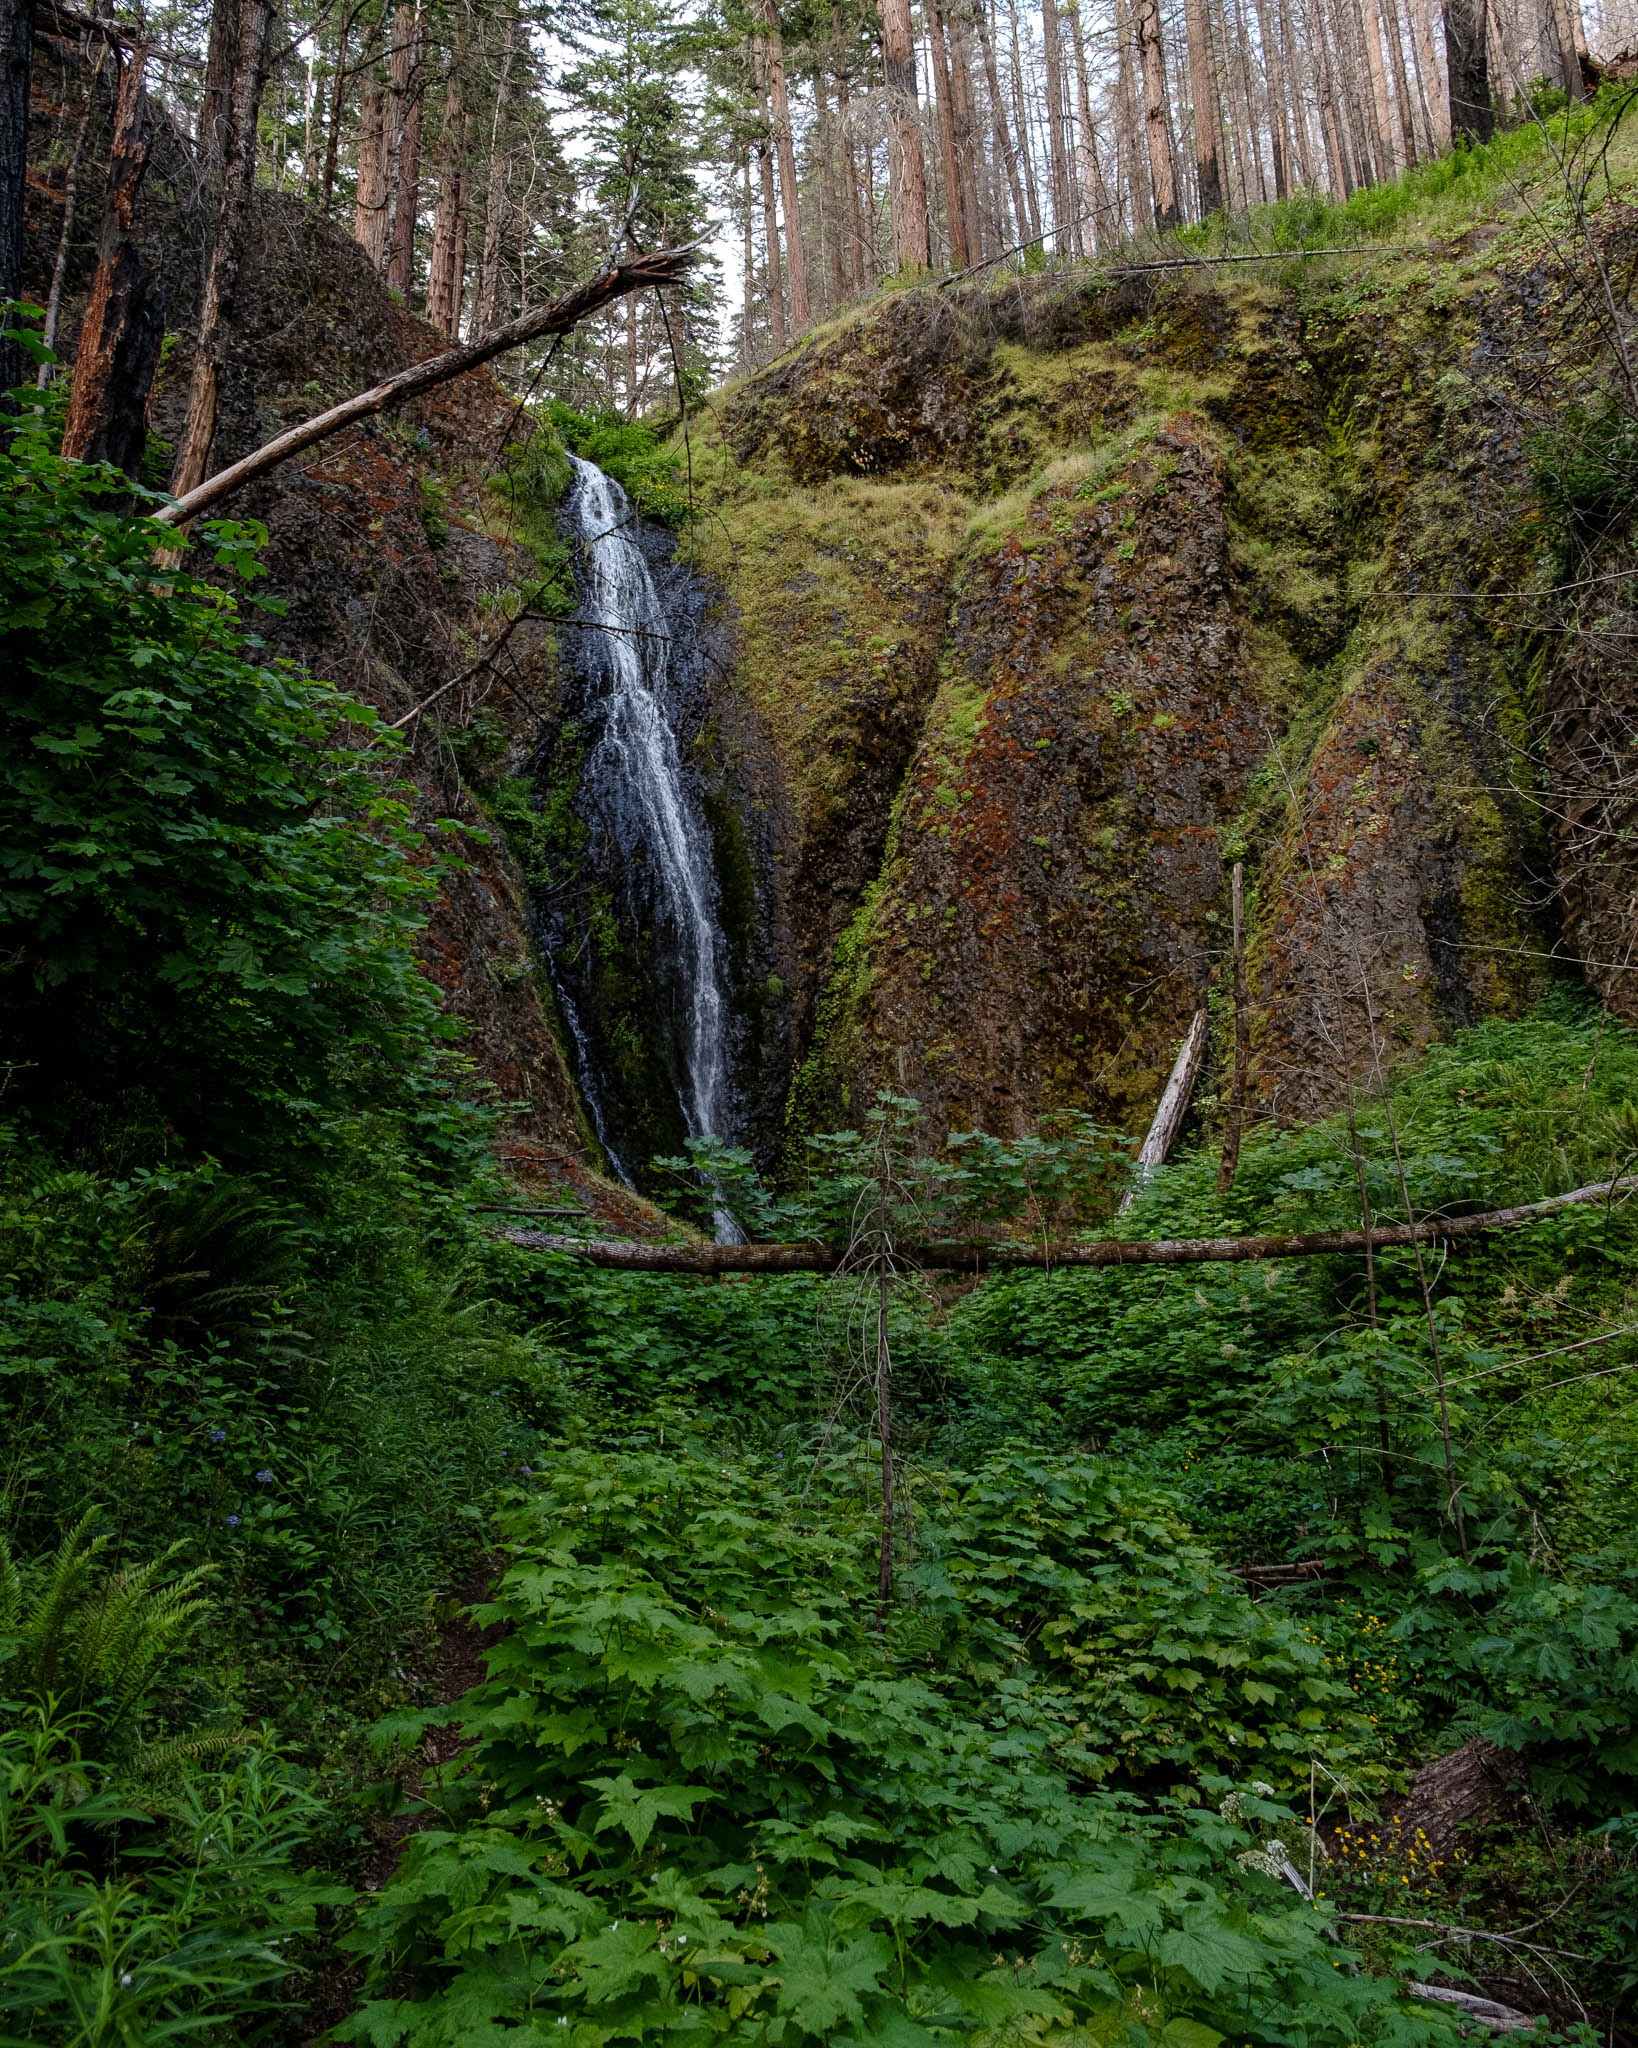 A small waterfall flows several stories down a mossy cliff into a thickly overgrown streambed.